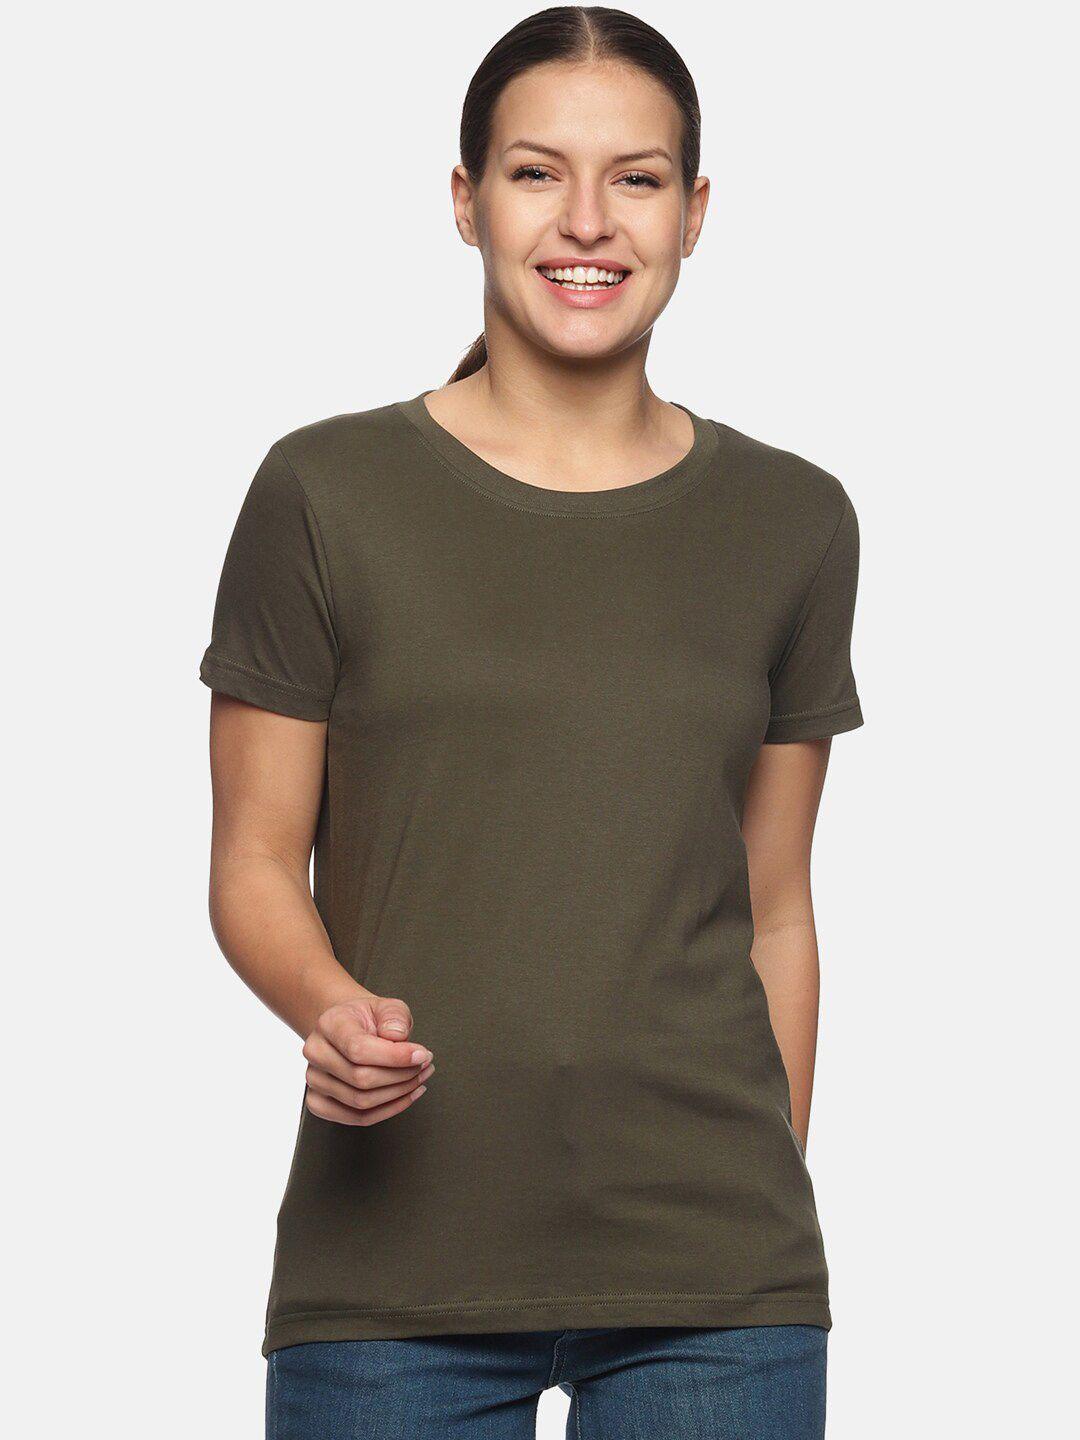 trends-tower-women-olive-green-pure-cotton-t-shirt